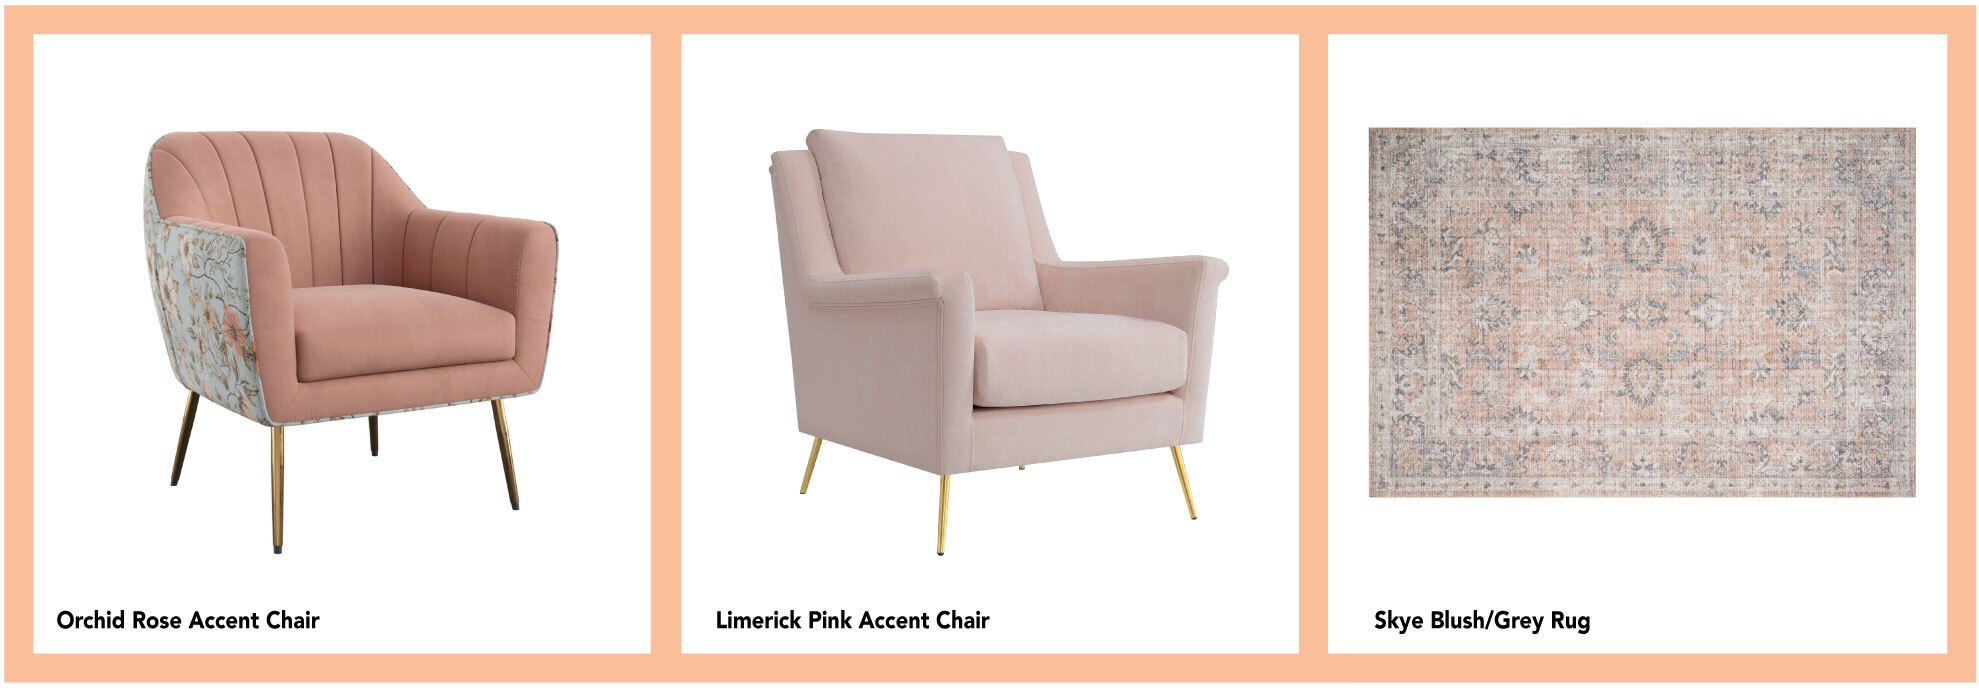 Orchid Rose Accent Chair, Limerick Pink accent chair, Skye Blush Grey Rug